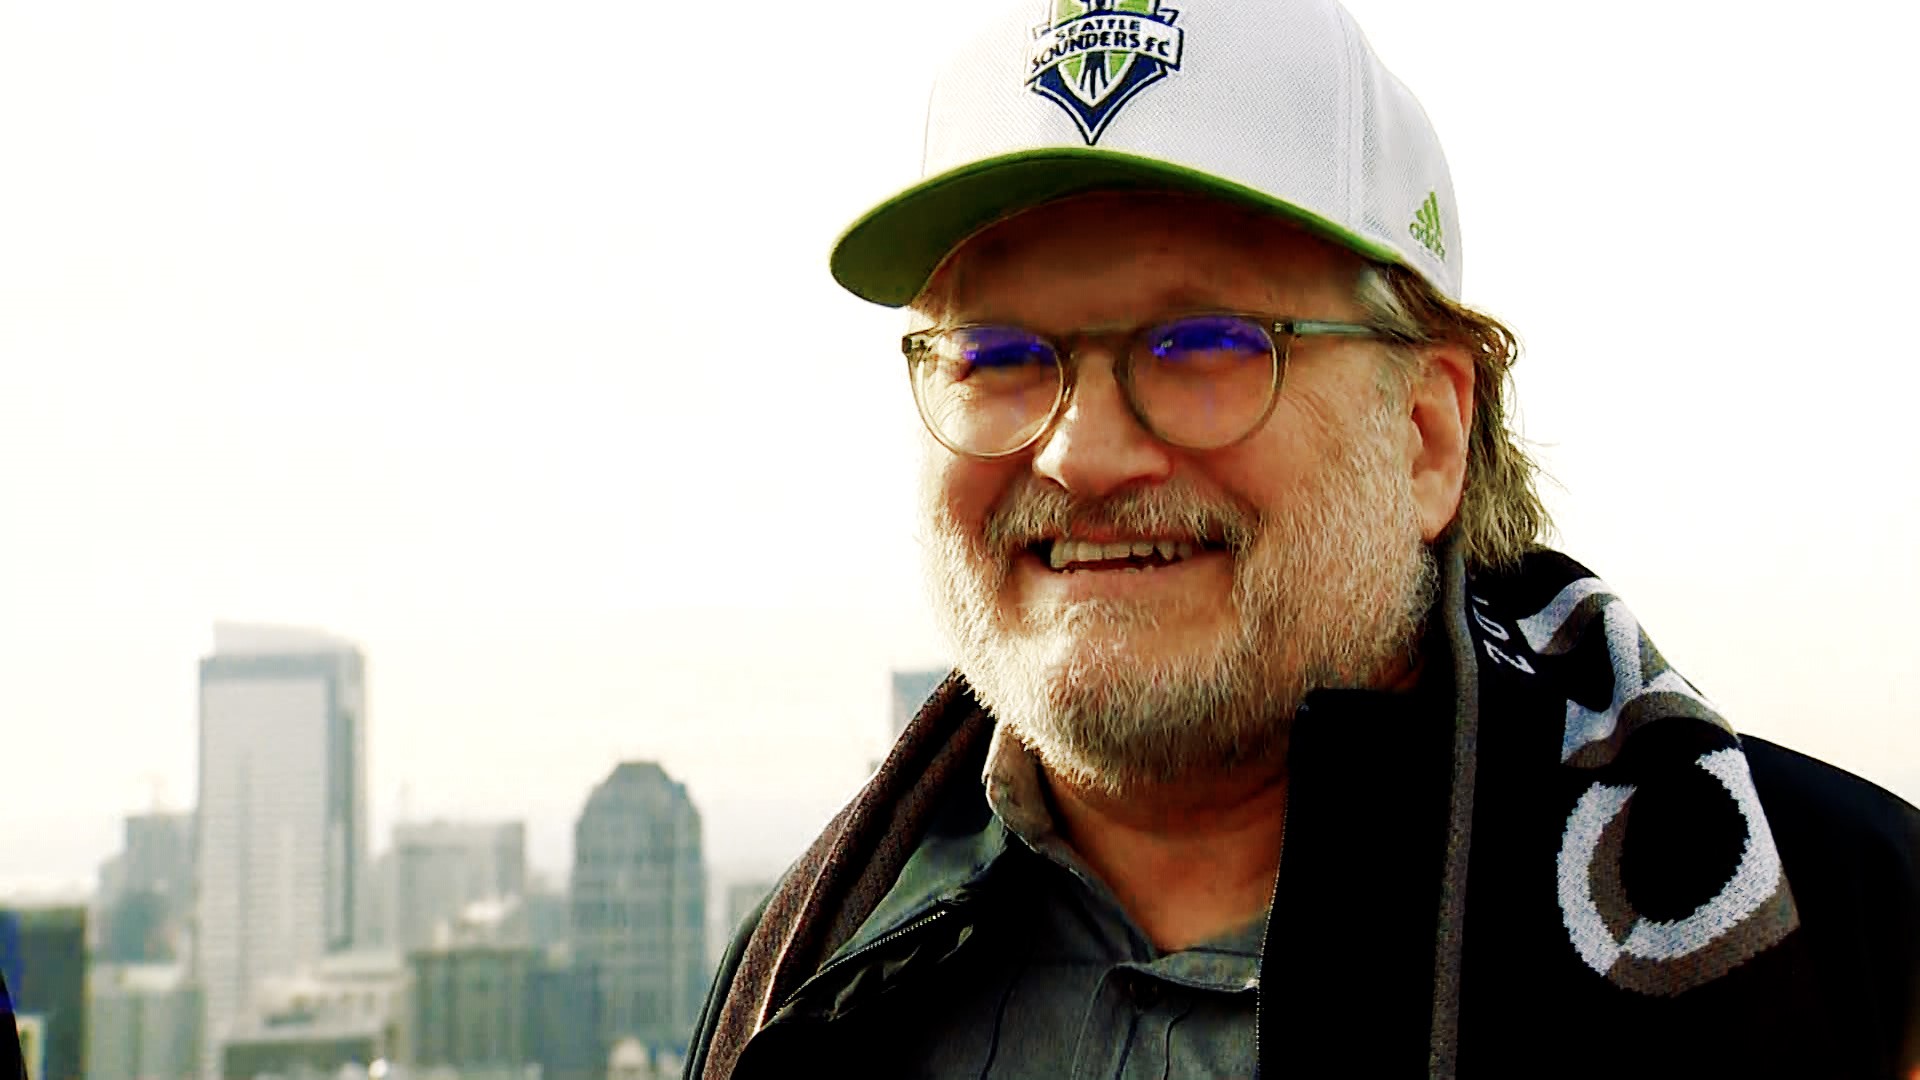 Seattle Sounders owner Drew Carey and former Sounder Brad Evans talk about the upcoming match and raise the flag over the city